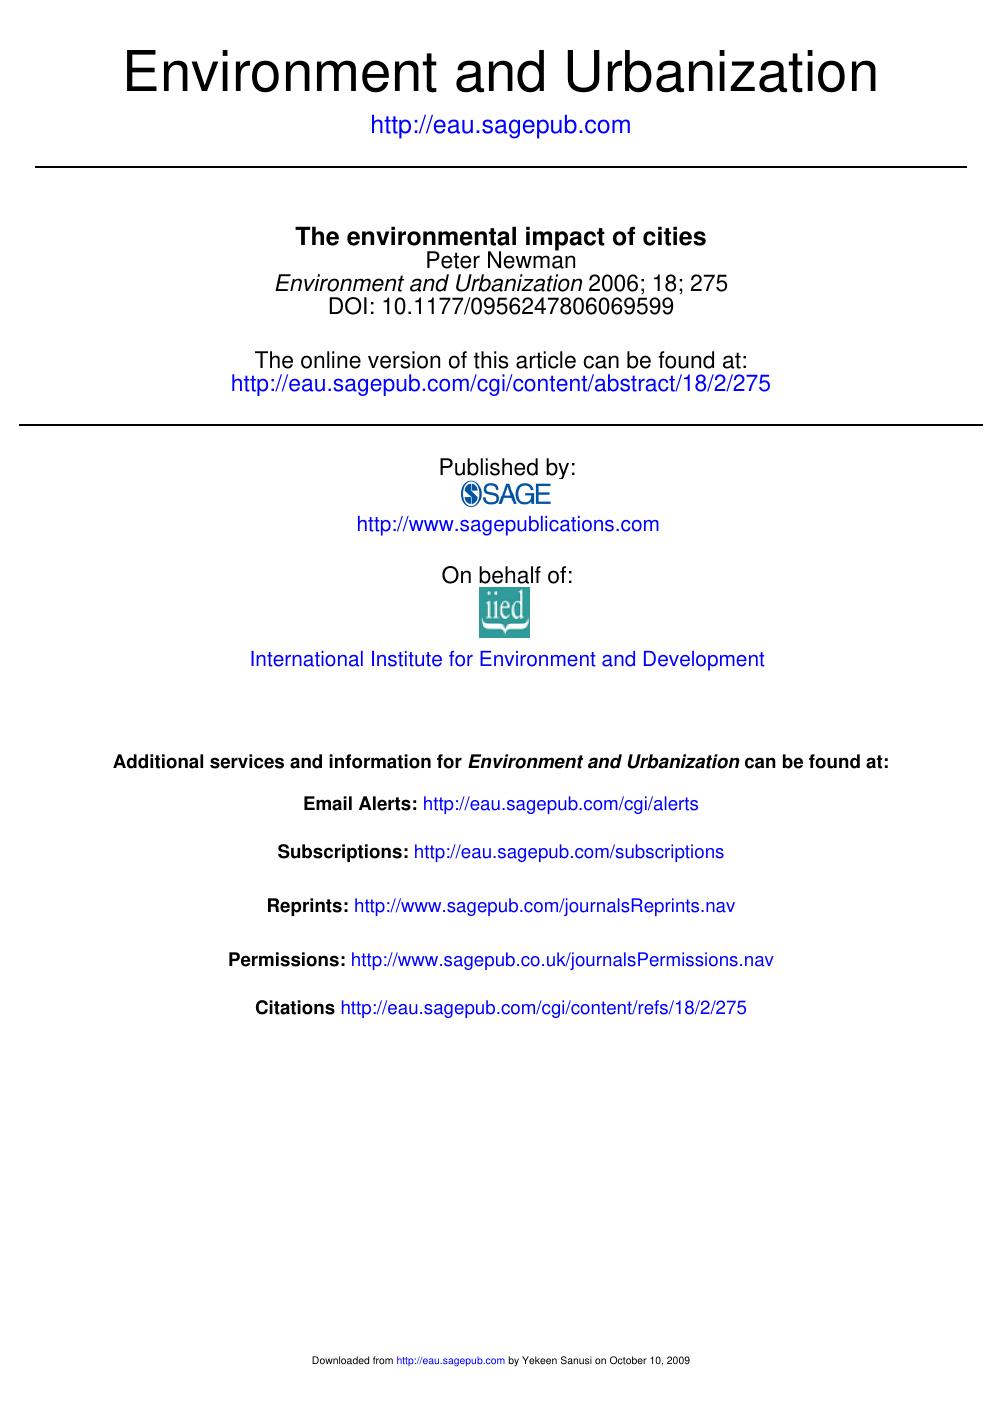 The environmental impact of cities, 2006